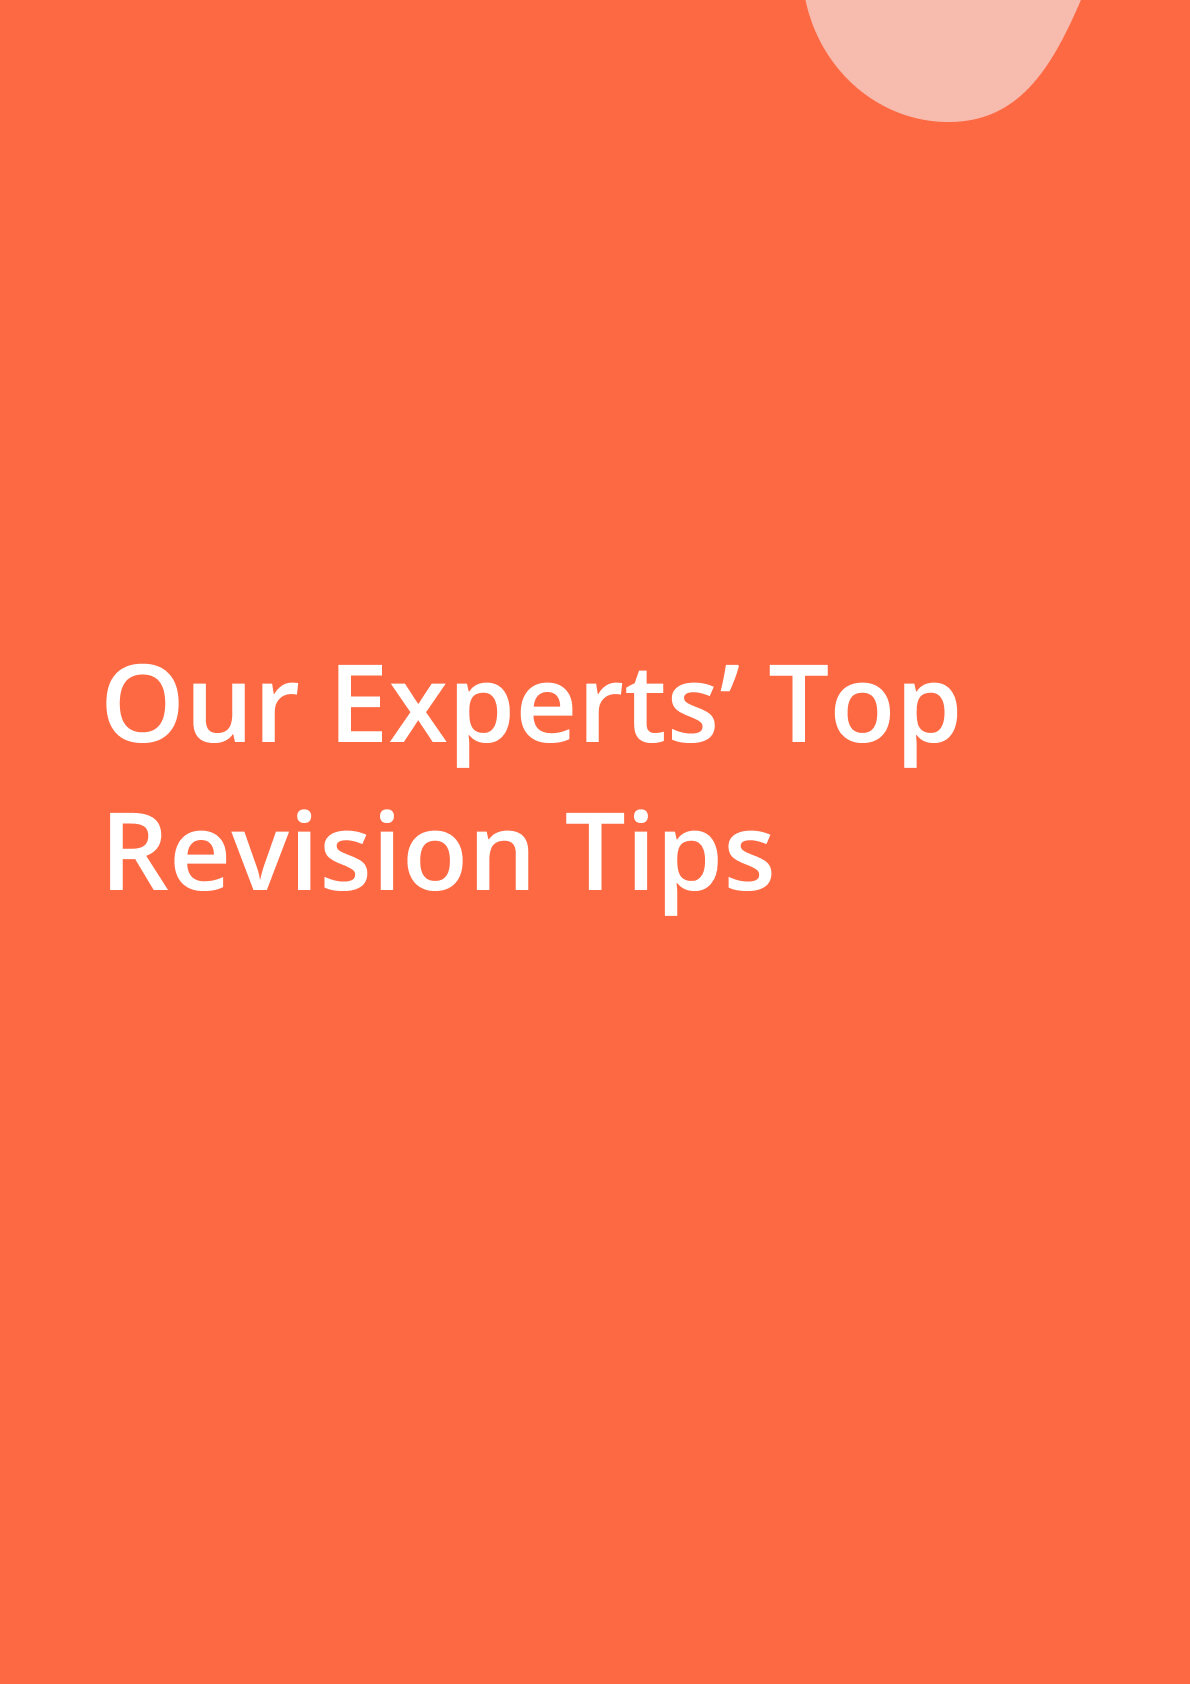 21 REVISION TIPS SECTION.jpg